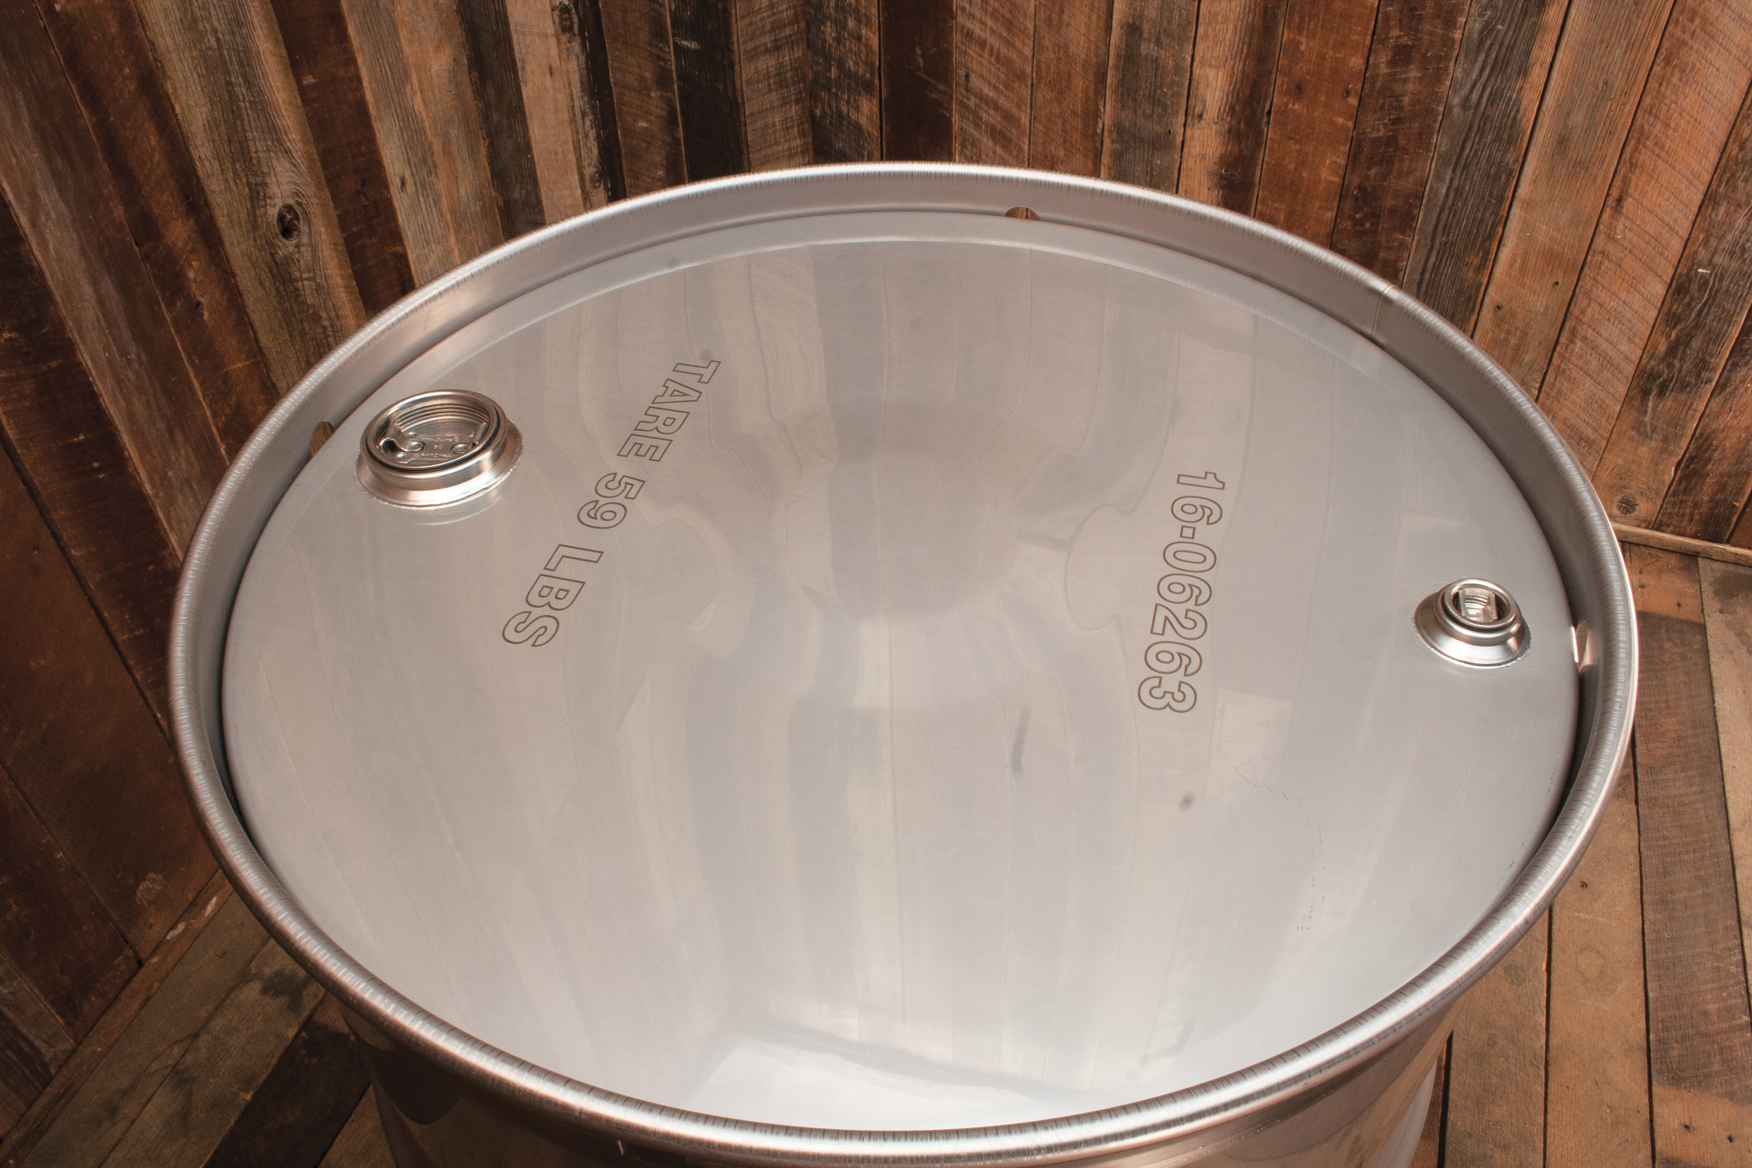 New 85 Gallon Stainless Steel Drum - Open Head, Food Grade - Use for Beer,  Wine, CBD Oil Production & More